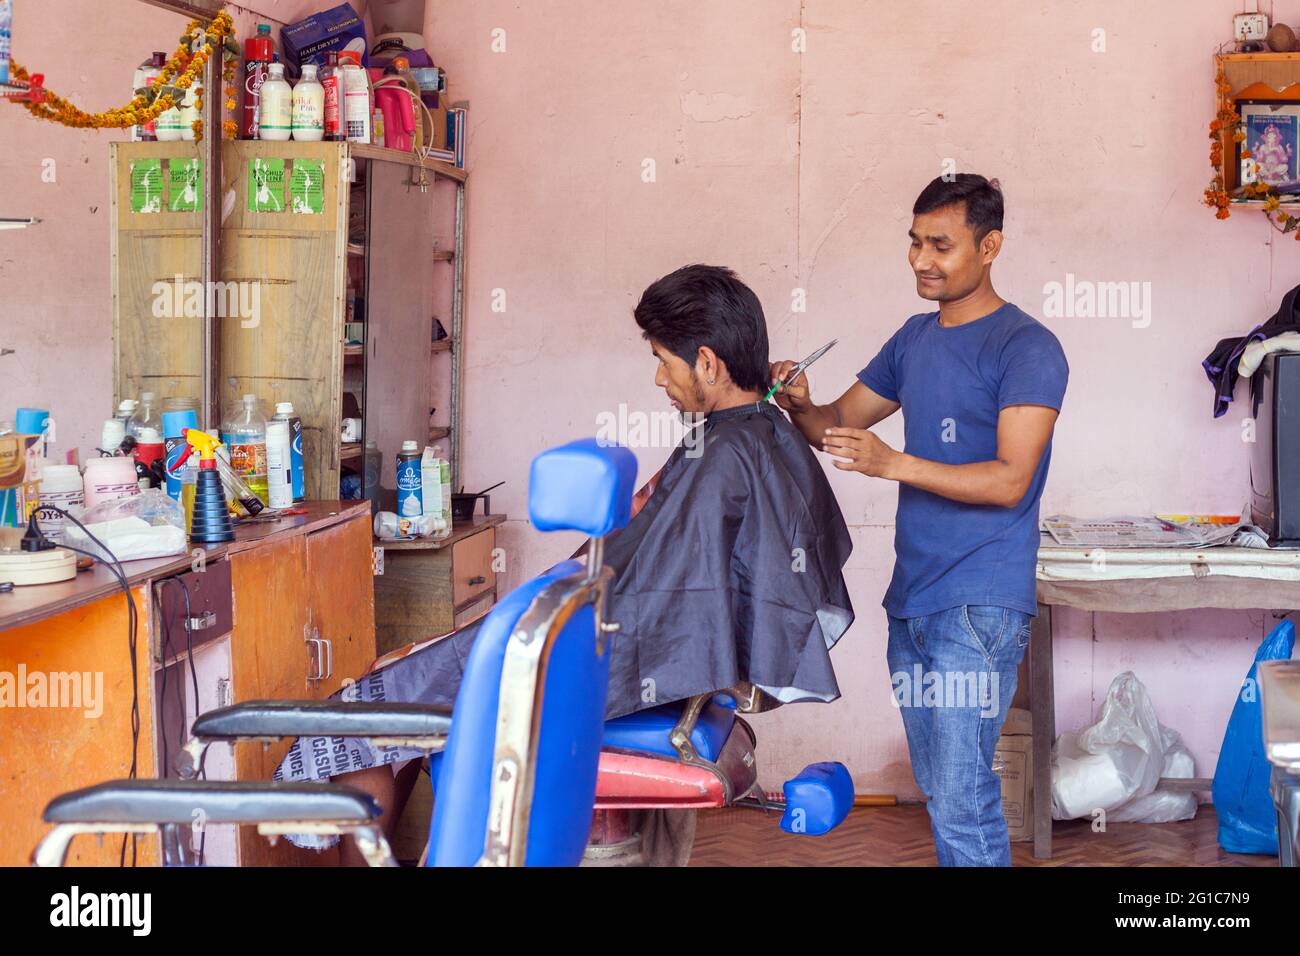 Indian male with bouffant hairstyle having his hair cut in salon, Agonda, Goa, India Stock Photo